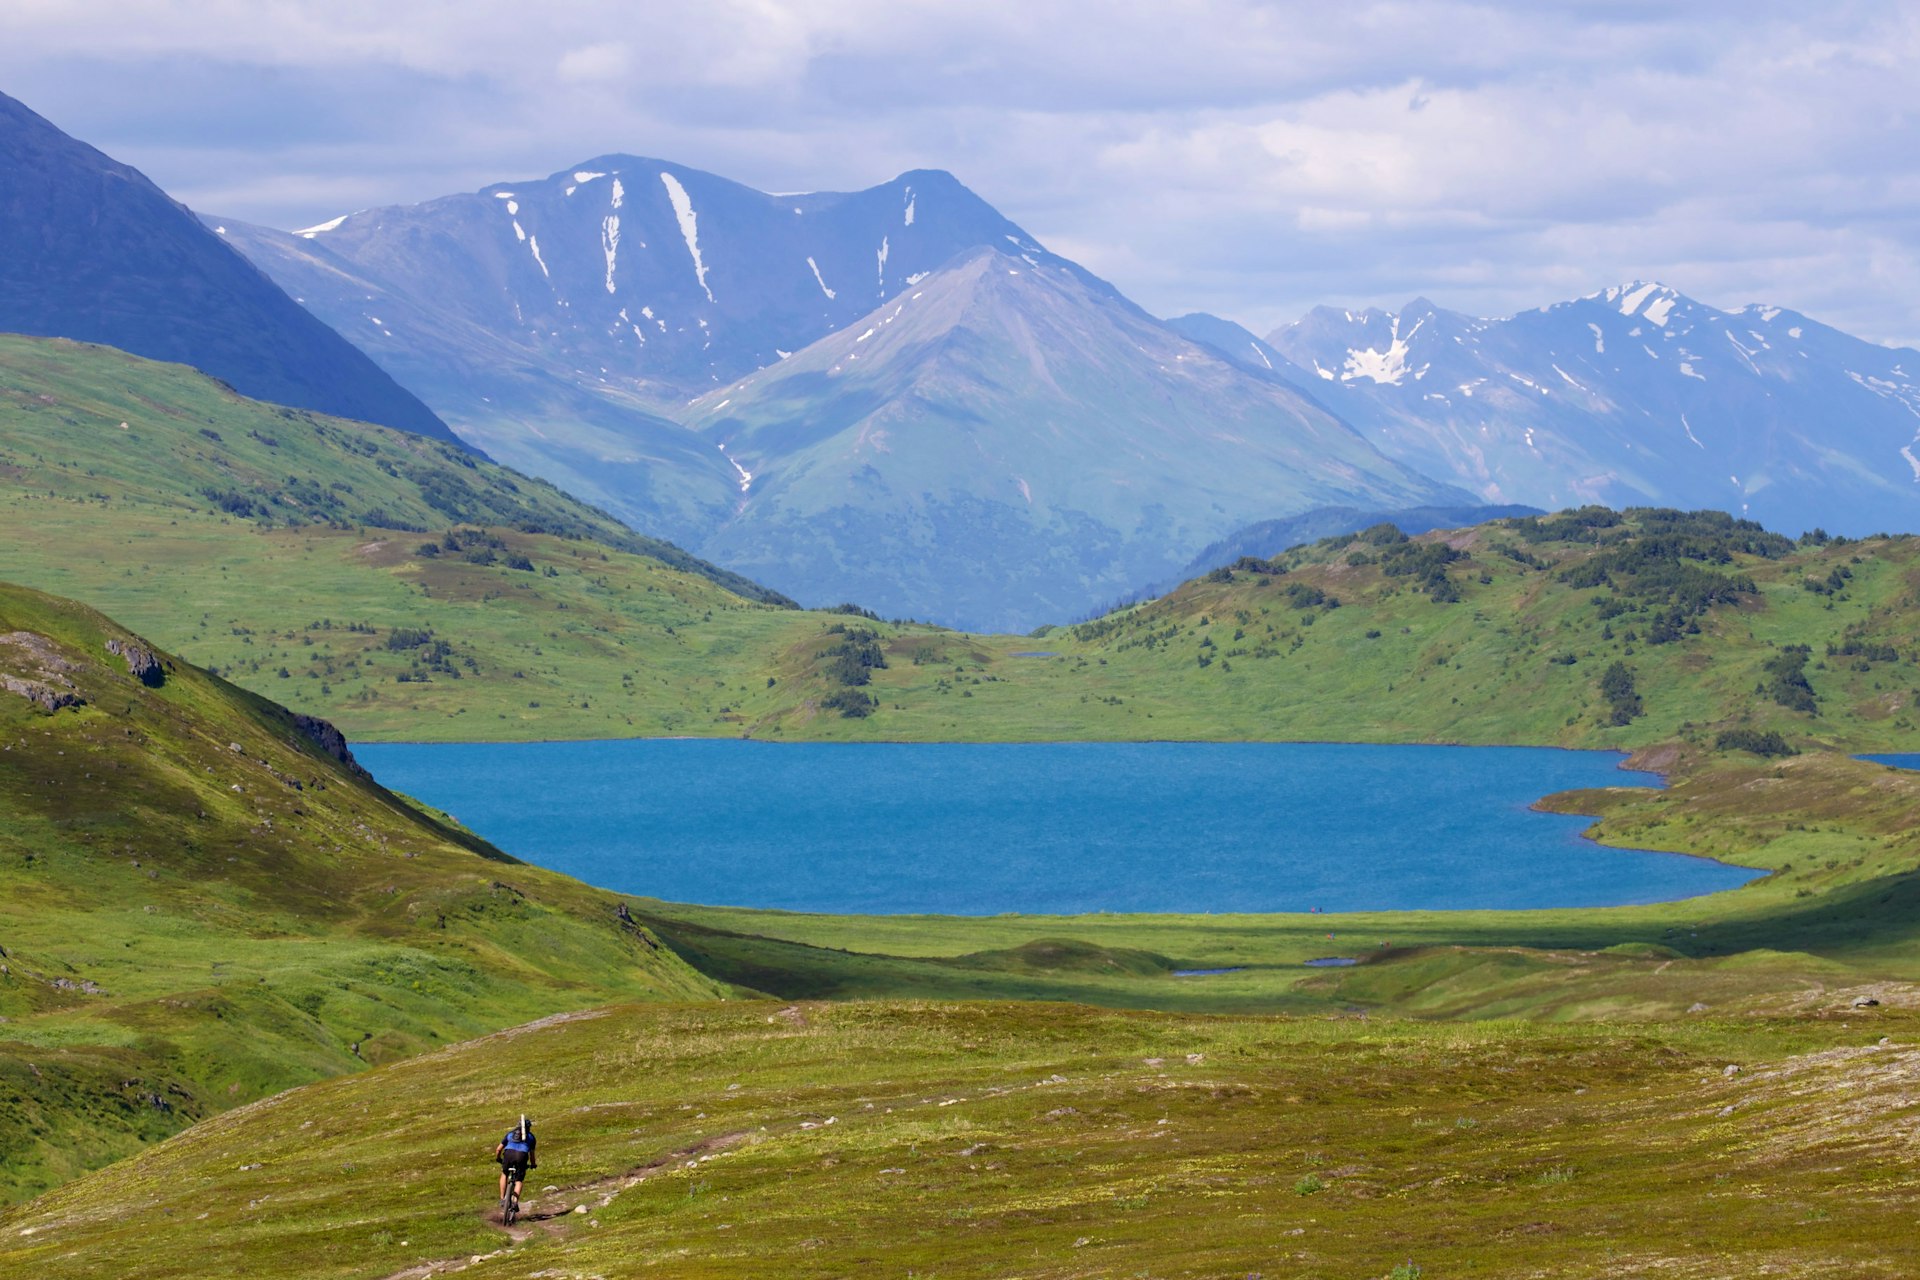 A mountain biker travels toward a lake surrounded by mountains